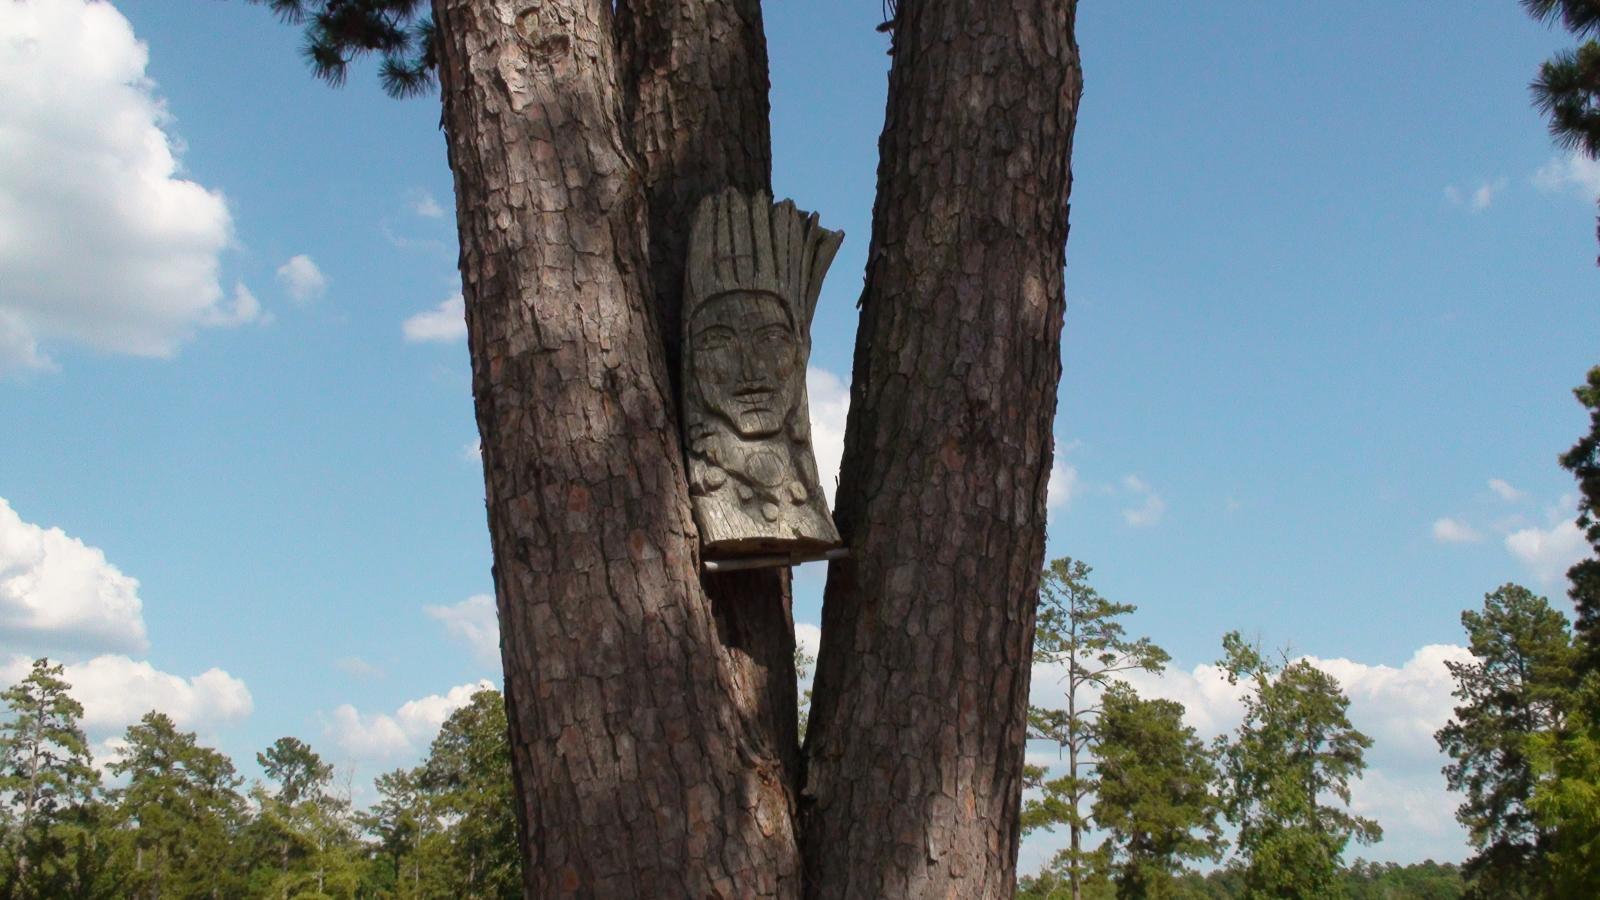 a wooden carving of a man in the woods